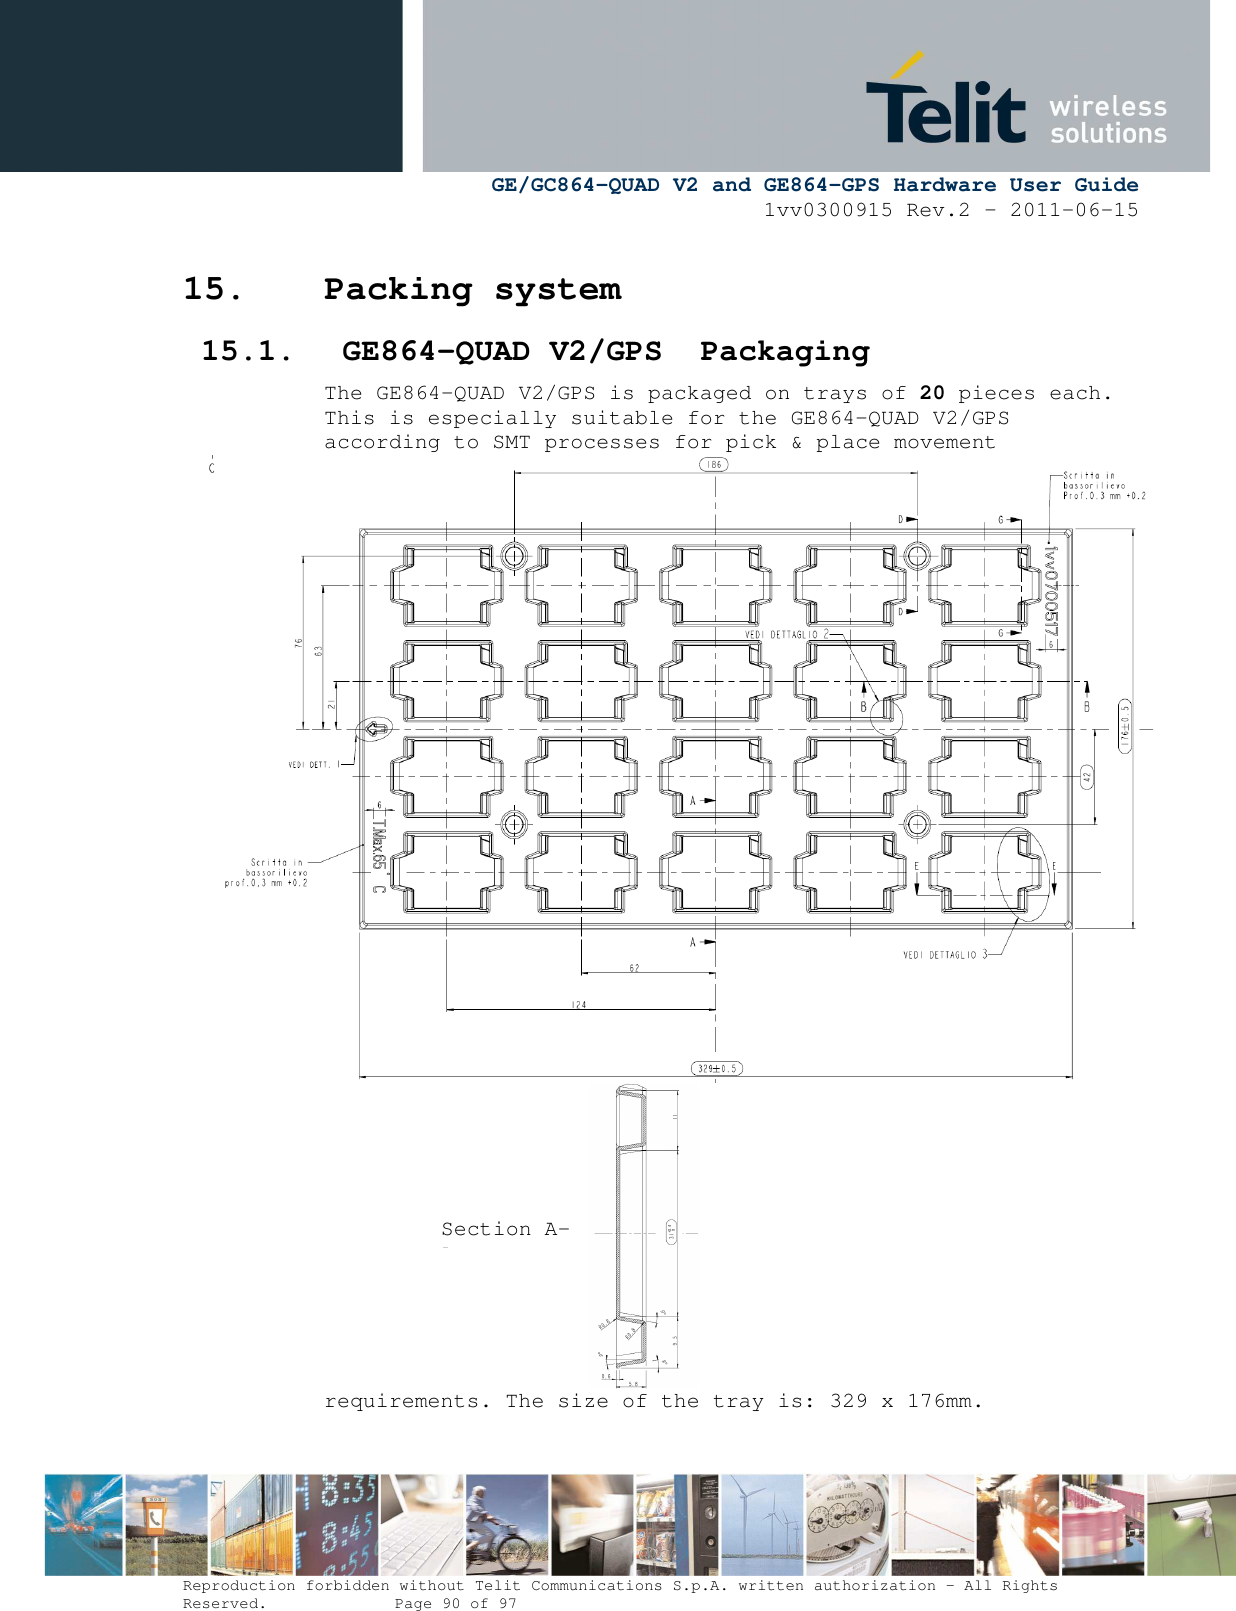      GE/GC864-QUAD V2 and GE864-GPS Hardware User Guide 1vv0300915 Rev.2 – 2011-06-15  Reproduction forbidden without Telit Communications S.p.A. written authorization - All Rights Reserved.    Page 90 of 97  15. Packing system  15.1. GE864-QUAD V2/GPS  Packaging The GE864-QUAD V2/GPS is packaged on trays of 20 pieces each. This is especially suitable for the GE864-QUAD V2/GPS according to SMT processes for pick &amp; place movement requirements. The size of the tray is: 329 x 176mm. Section A-A 